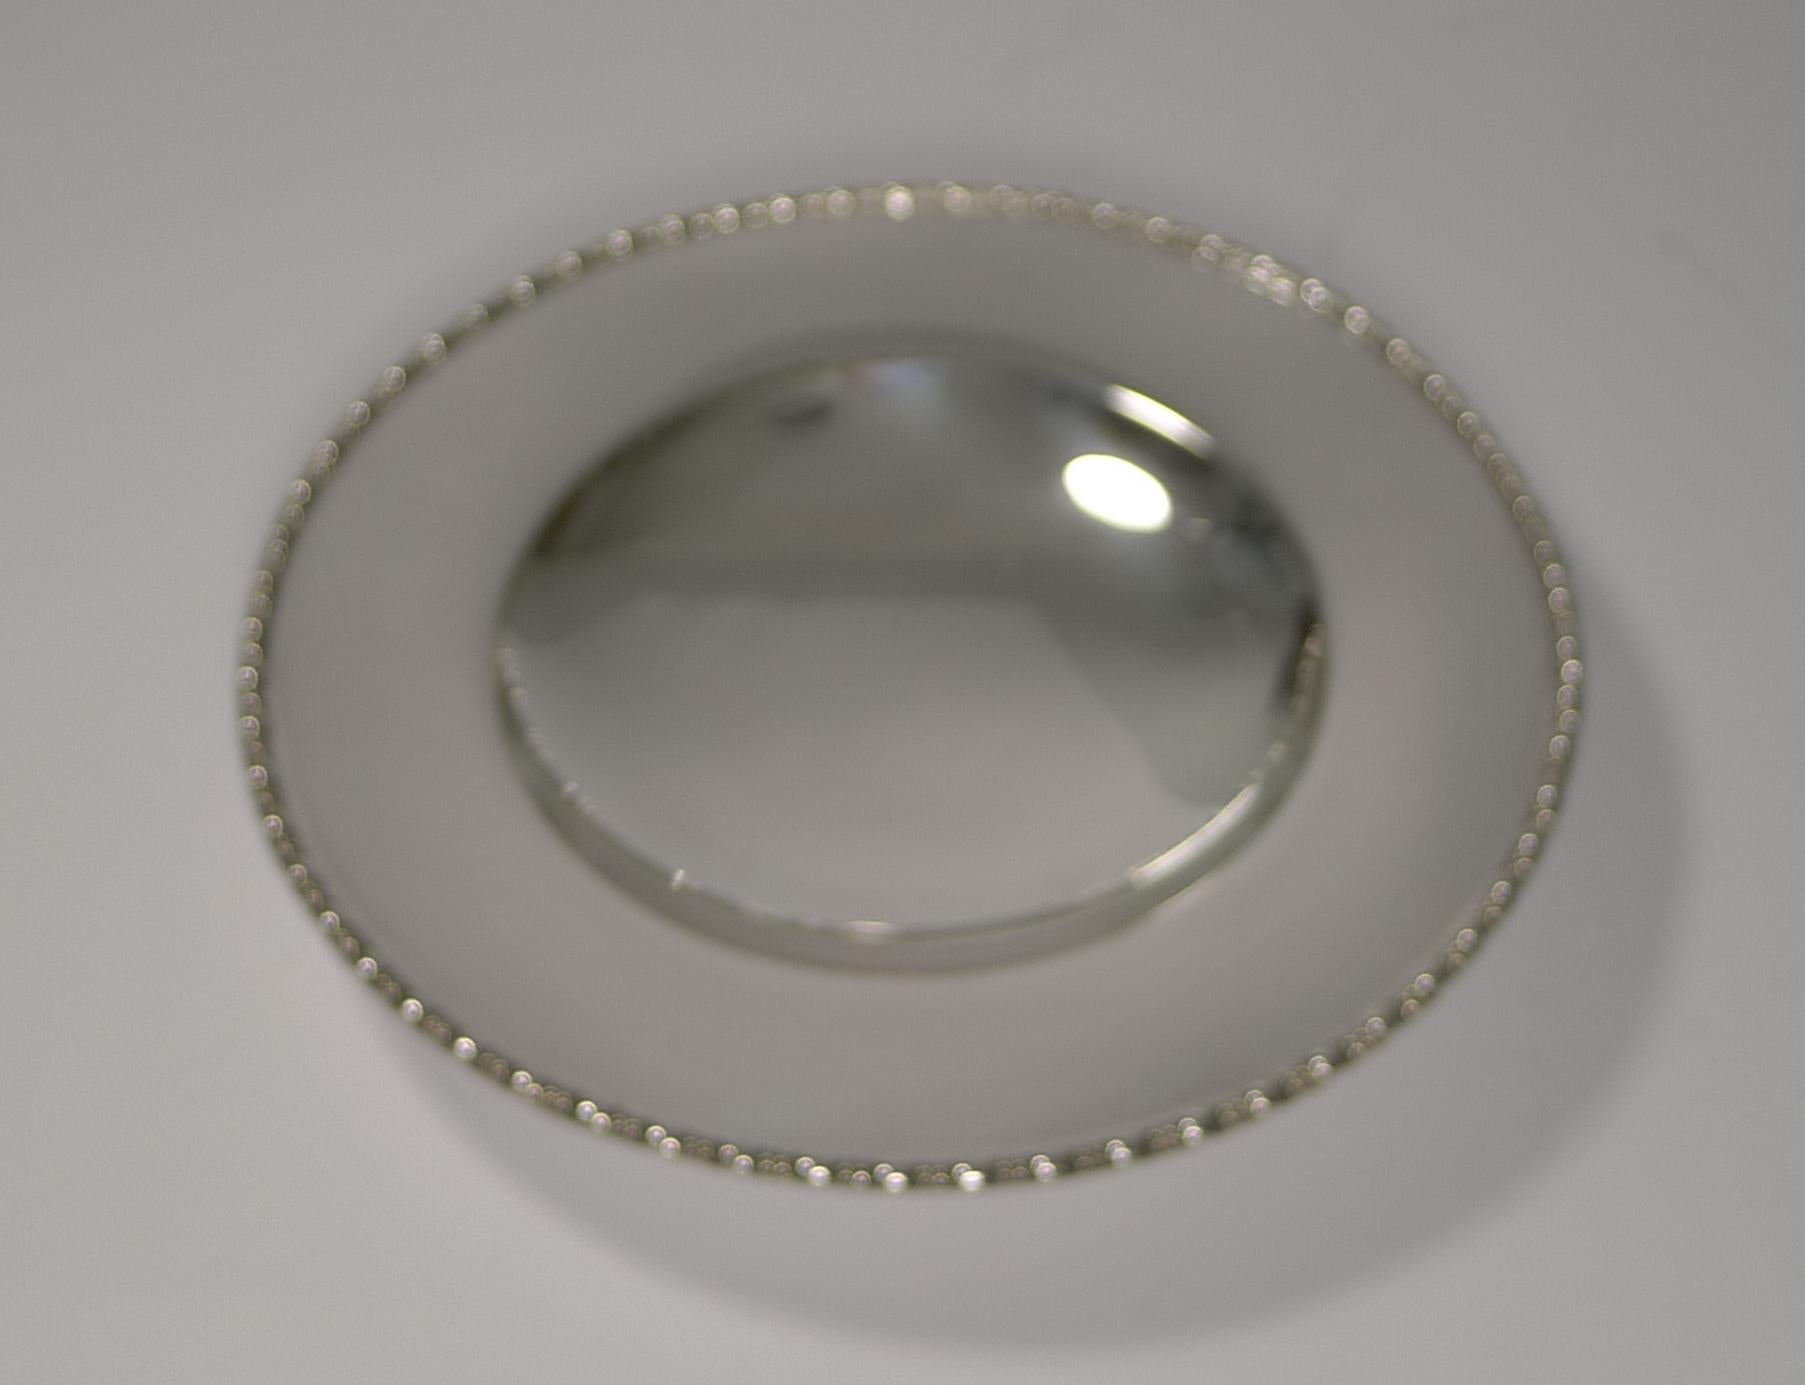 About as good as they come; this is an excellent example, lovely quality by the well renowned silversmith, Mappin and Webb, each plate signed on the underside.

The frame has an integral handle to the top clad in braided cane, an unusual and very